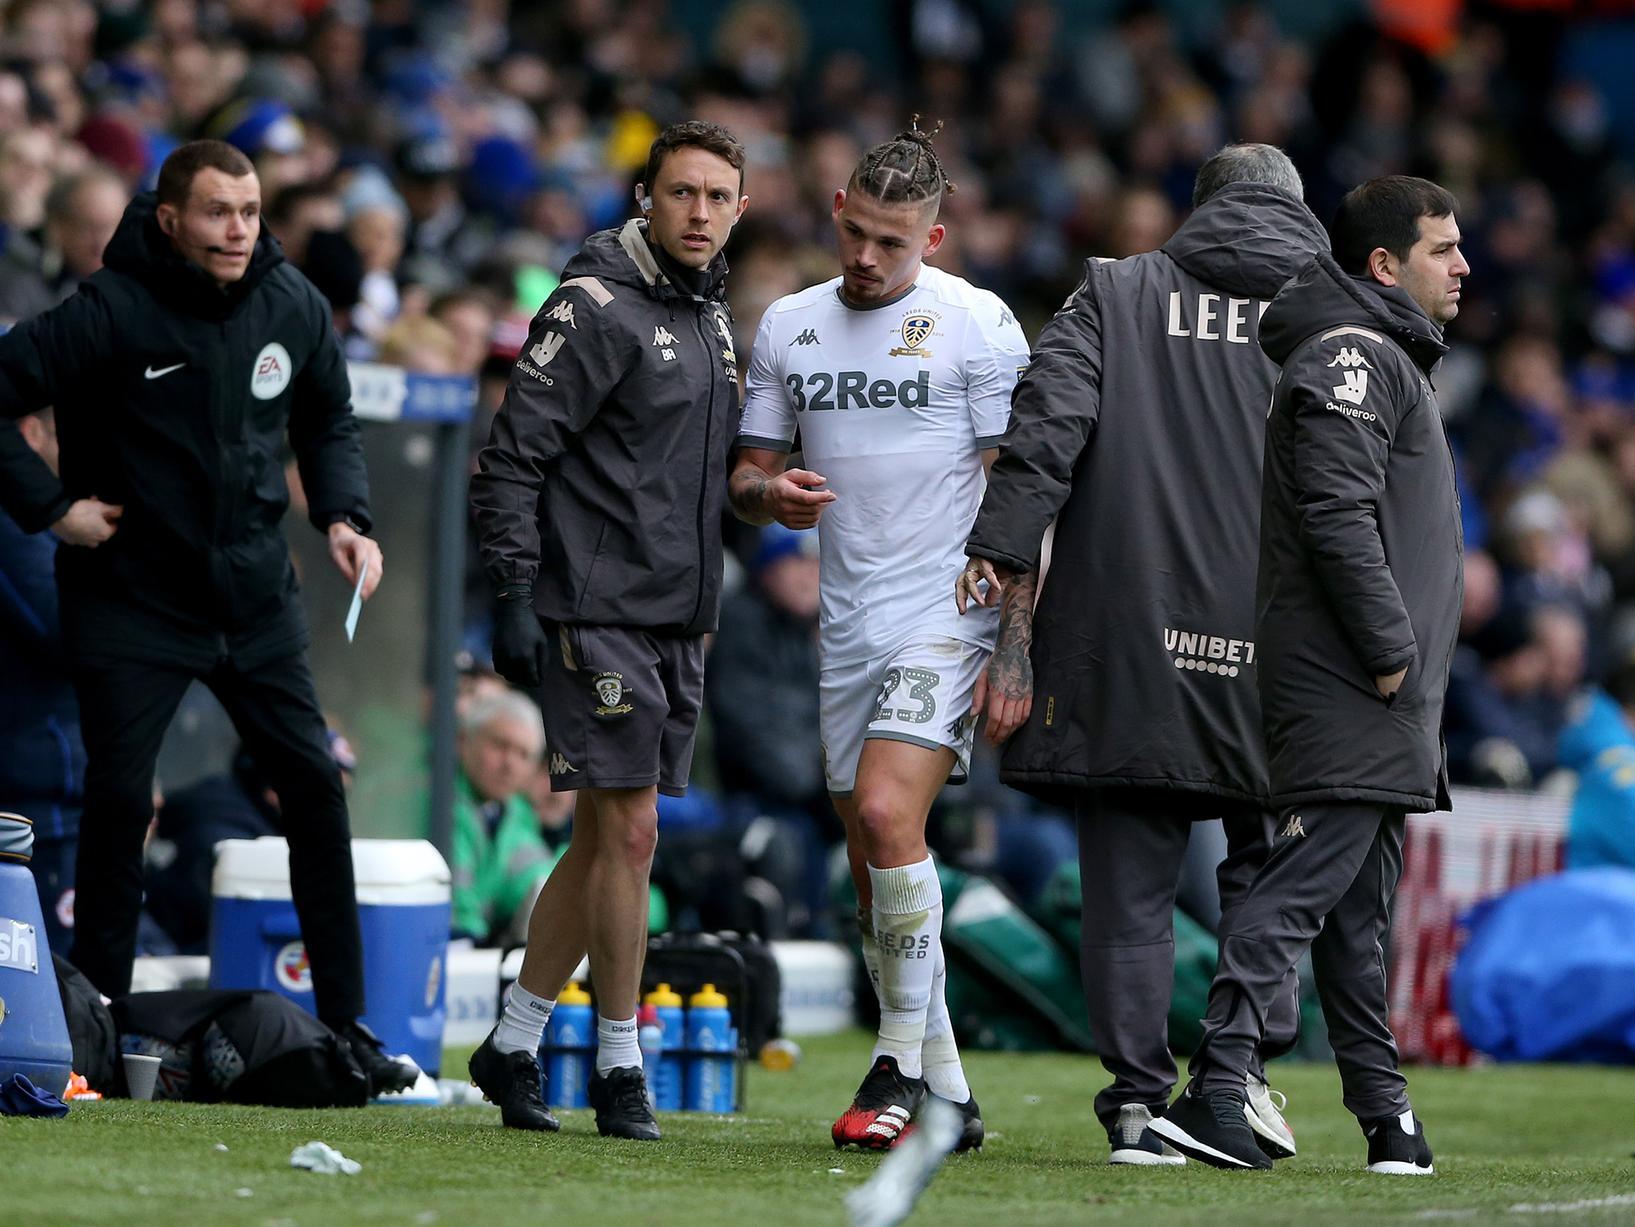 Leeds United boss Marcelo Bielsa has revealed that Kalvin Phillips and Kiko Casilla could feature against Middlesbrough this evening, despite the pair both suffering from injury complaints. (Yorkshire Evening Post)